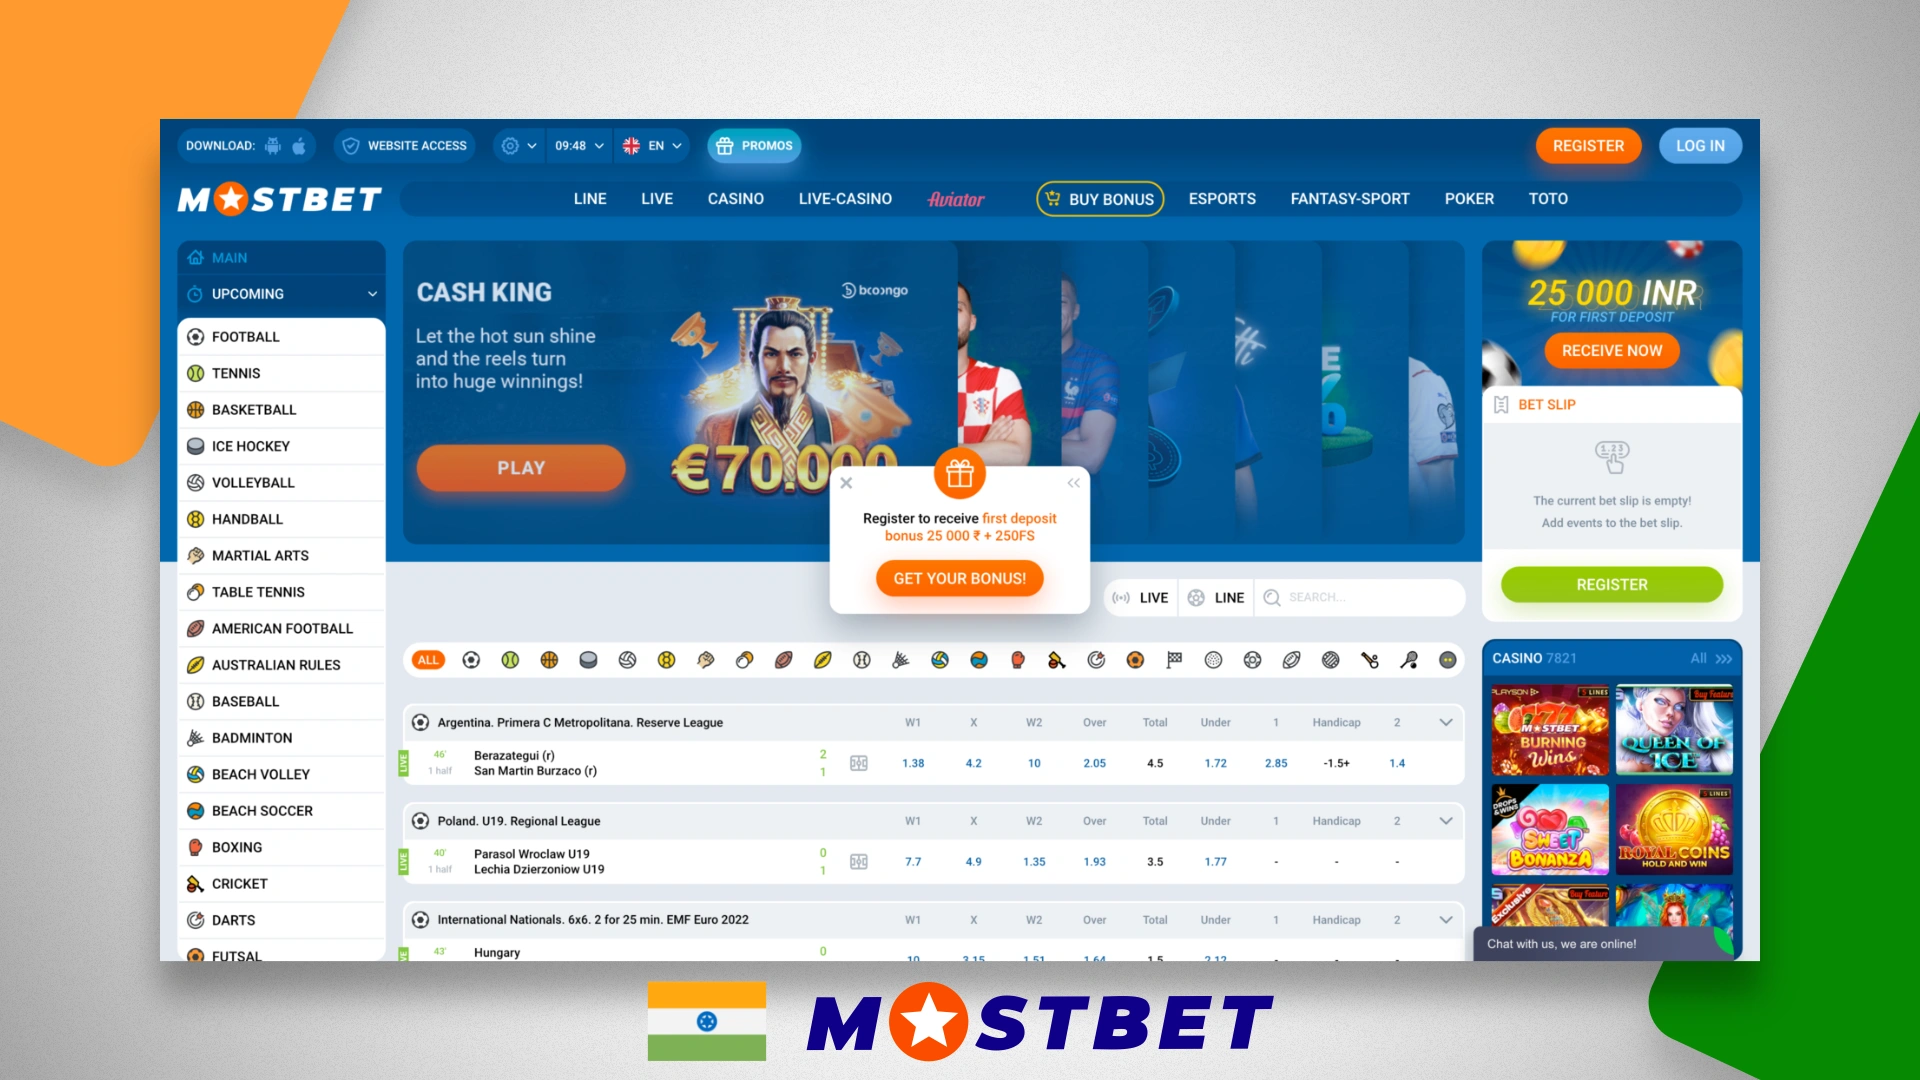 Home page of the betting company Mostbet India